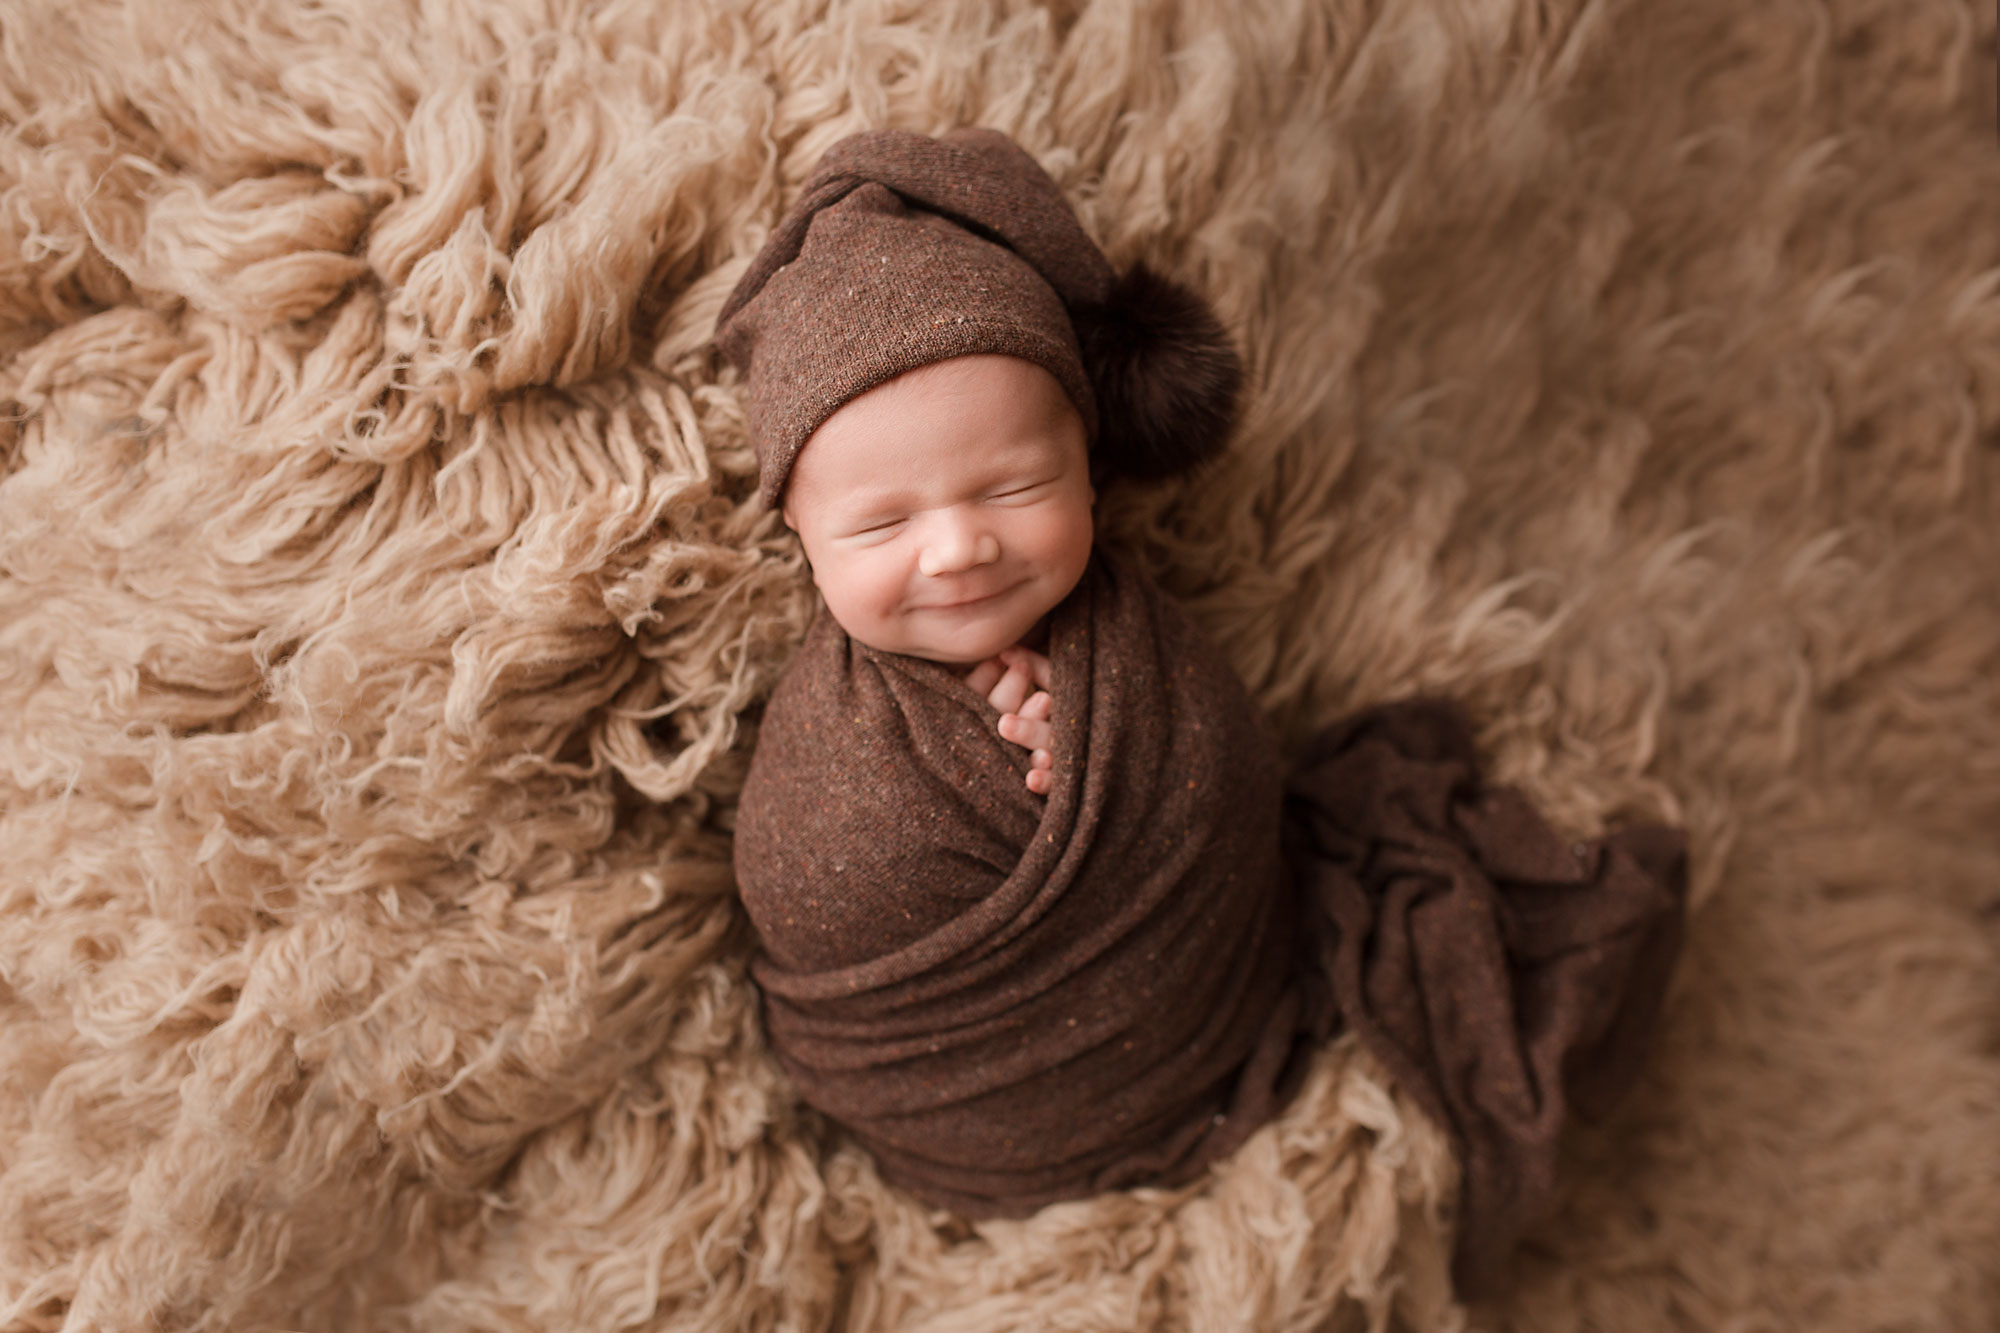 smiling baby wrapped up on a fuzzy rug newborn photos morris county nj